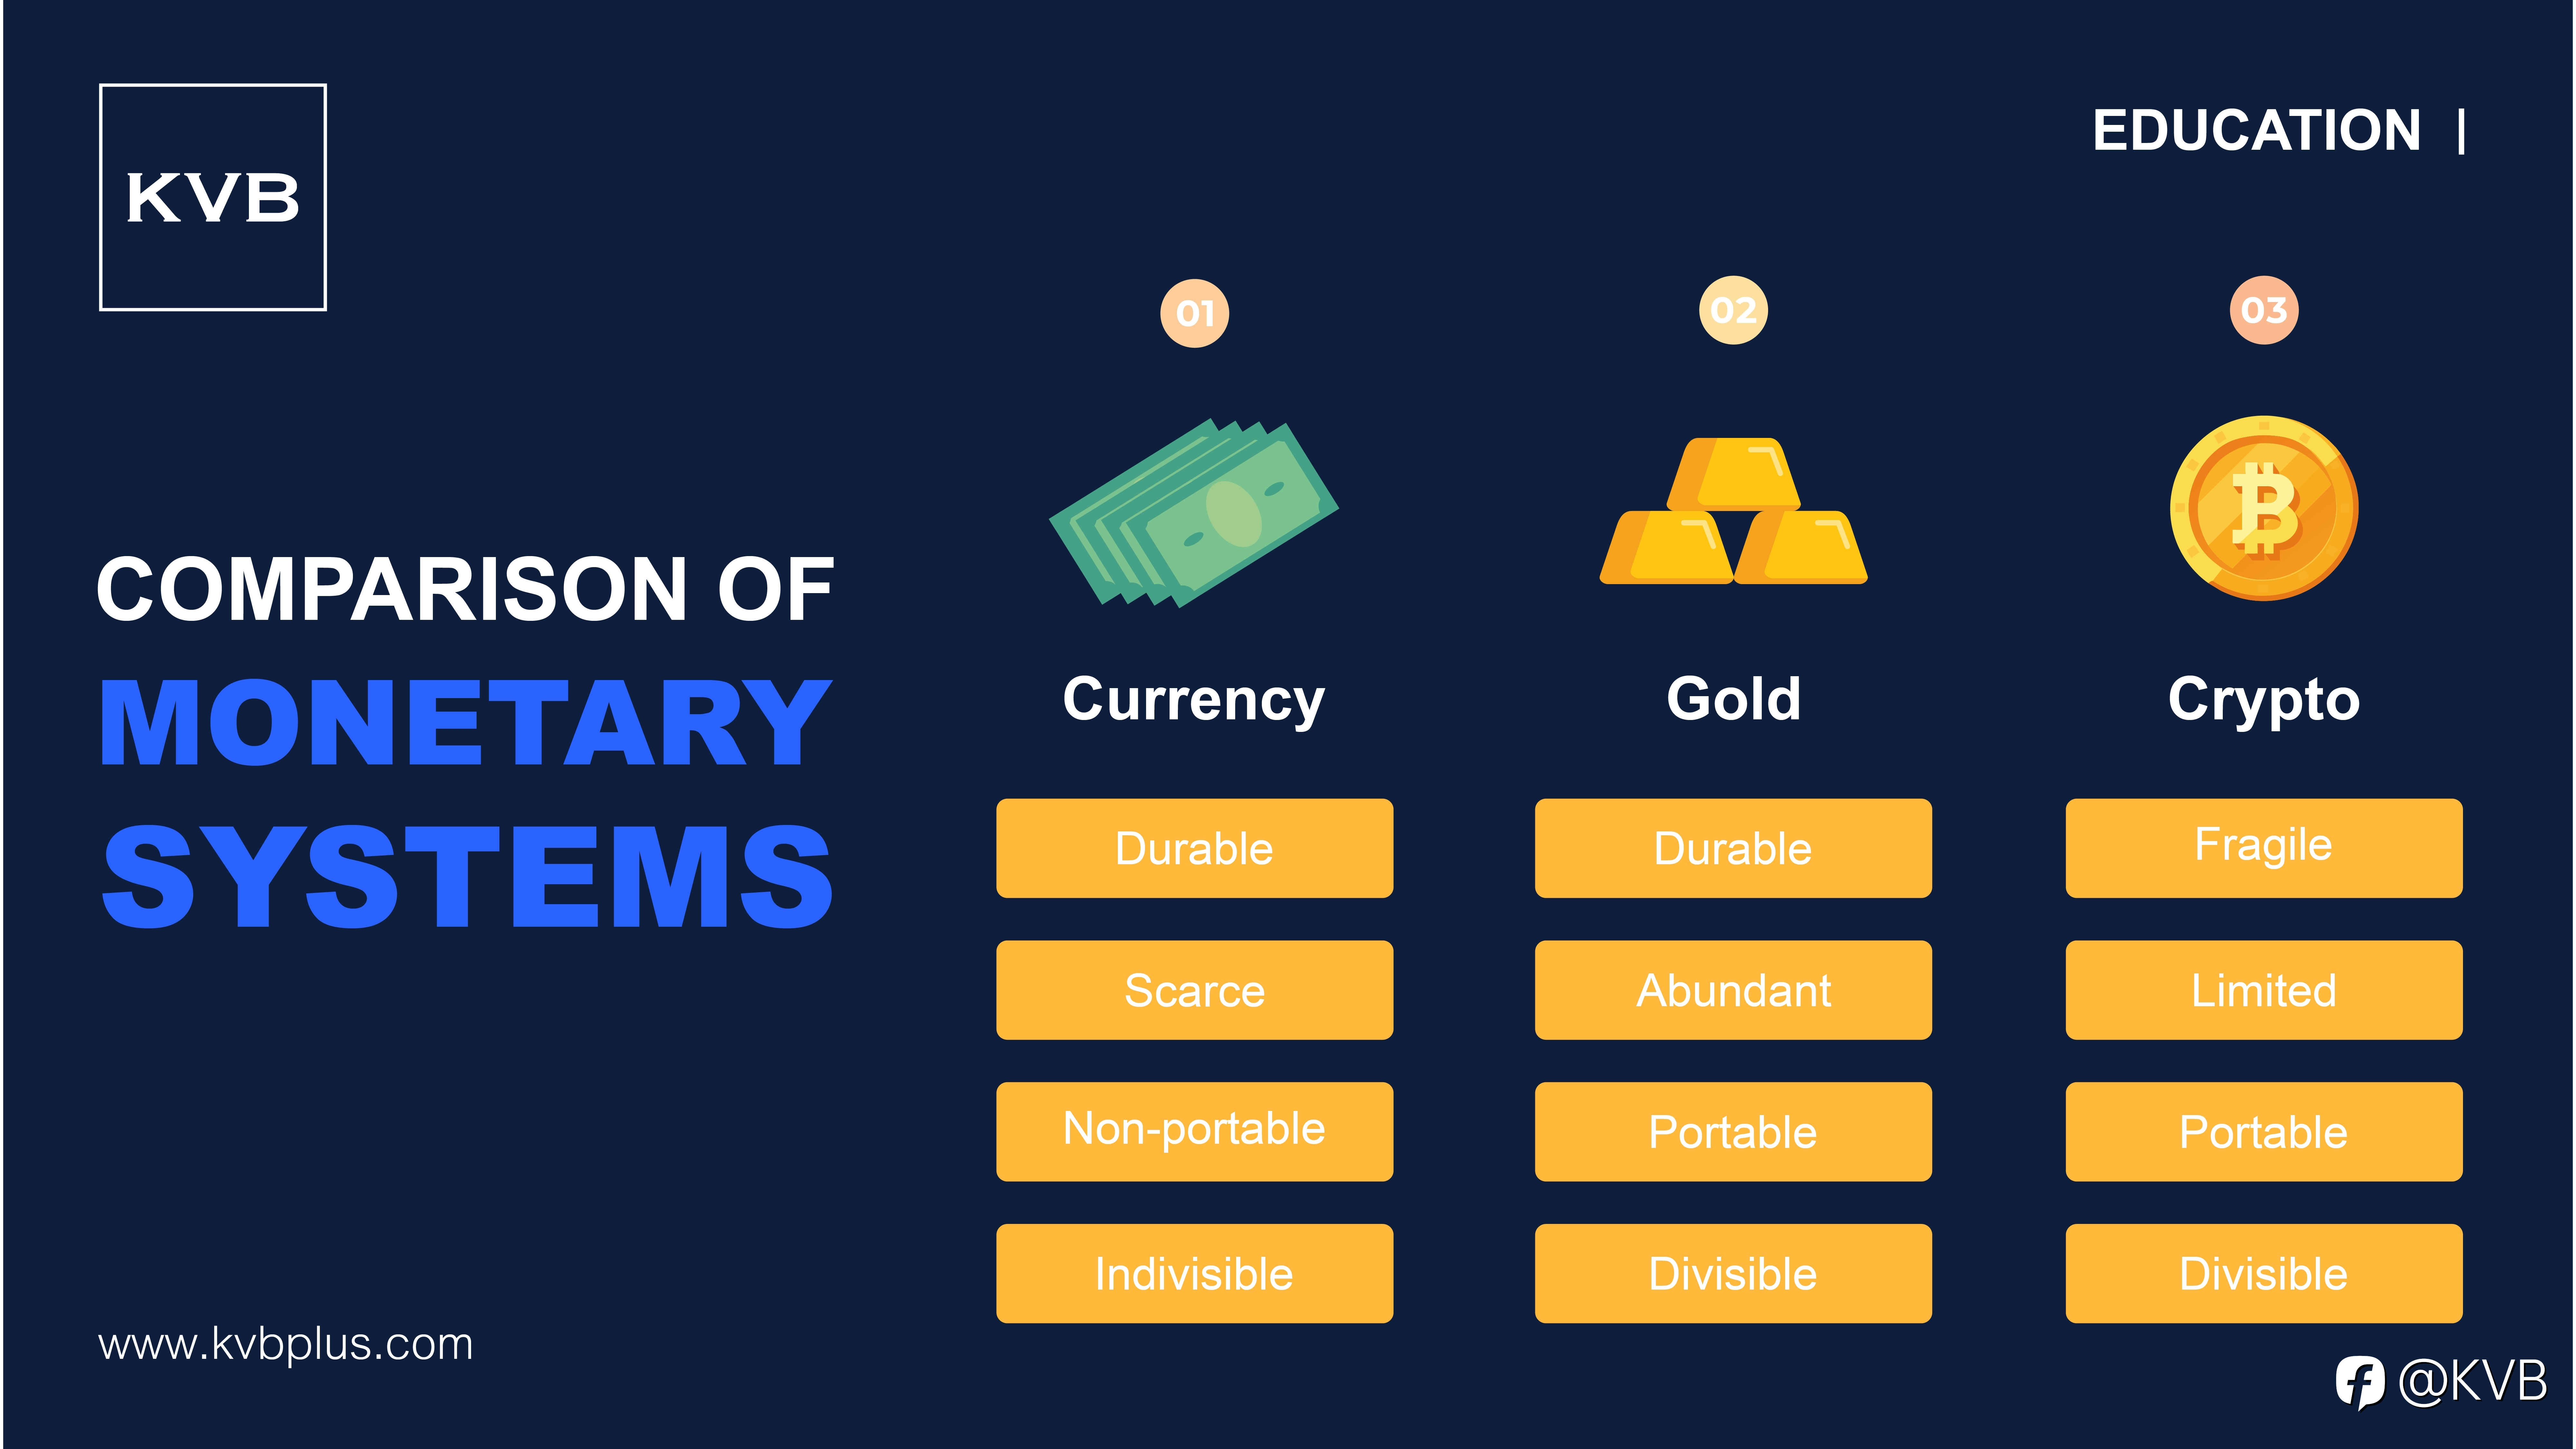 Comparing the difference between currency, gold and crypto 👩🏻‍🏫✨